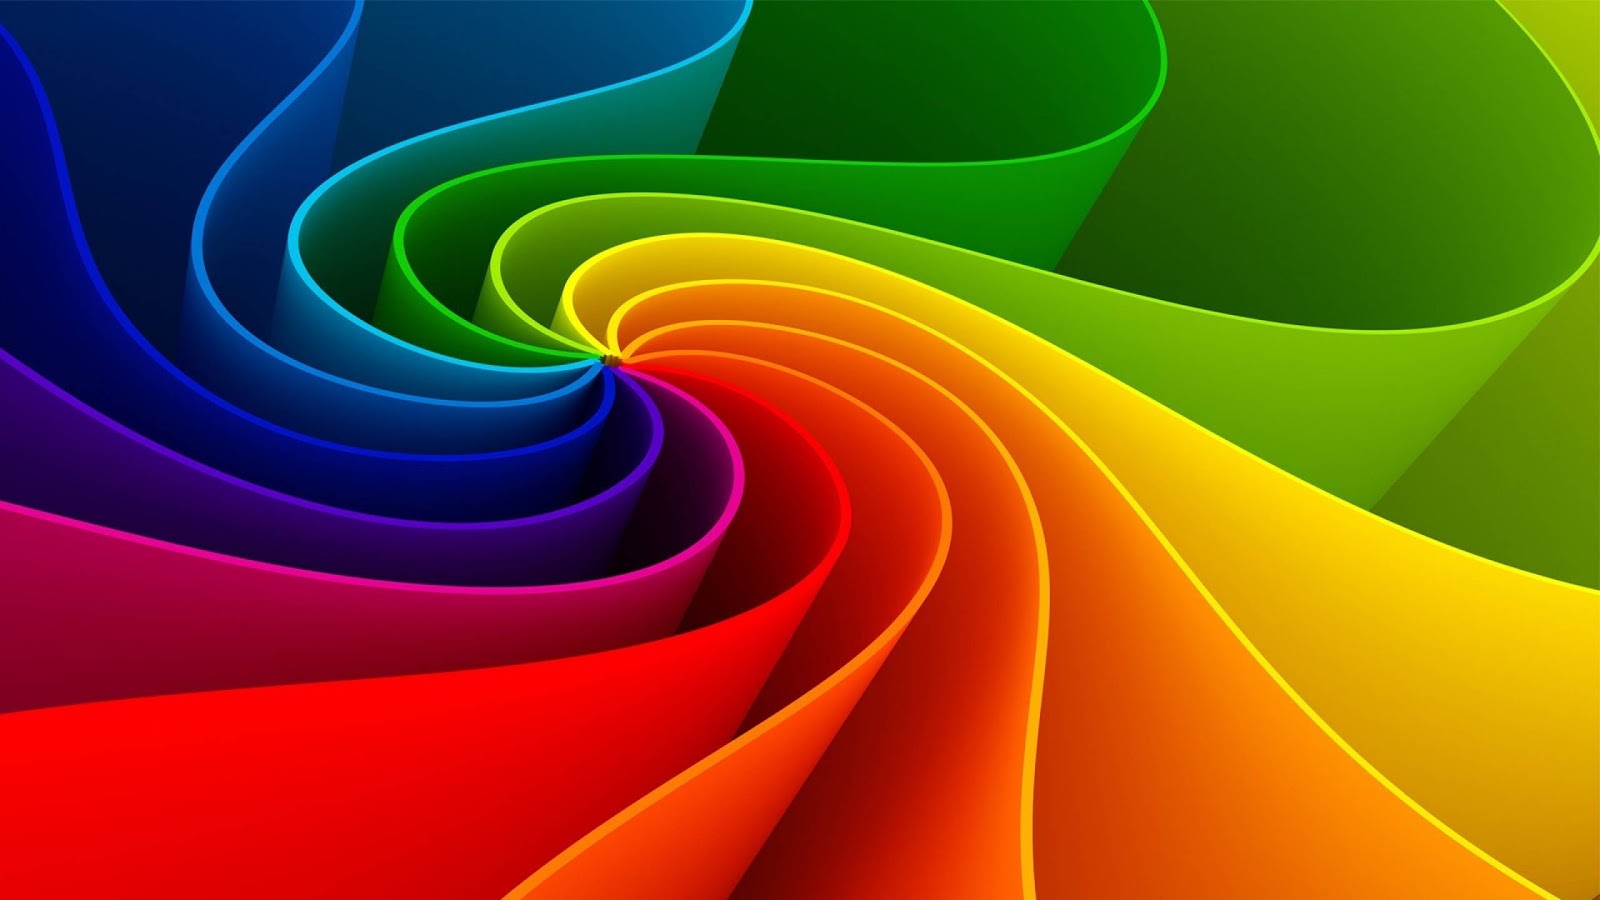  Colors Windows 8 Background and Wallpapers All for Windows 10 Free